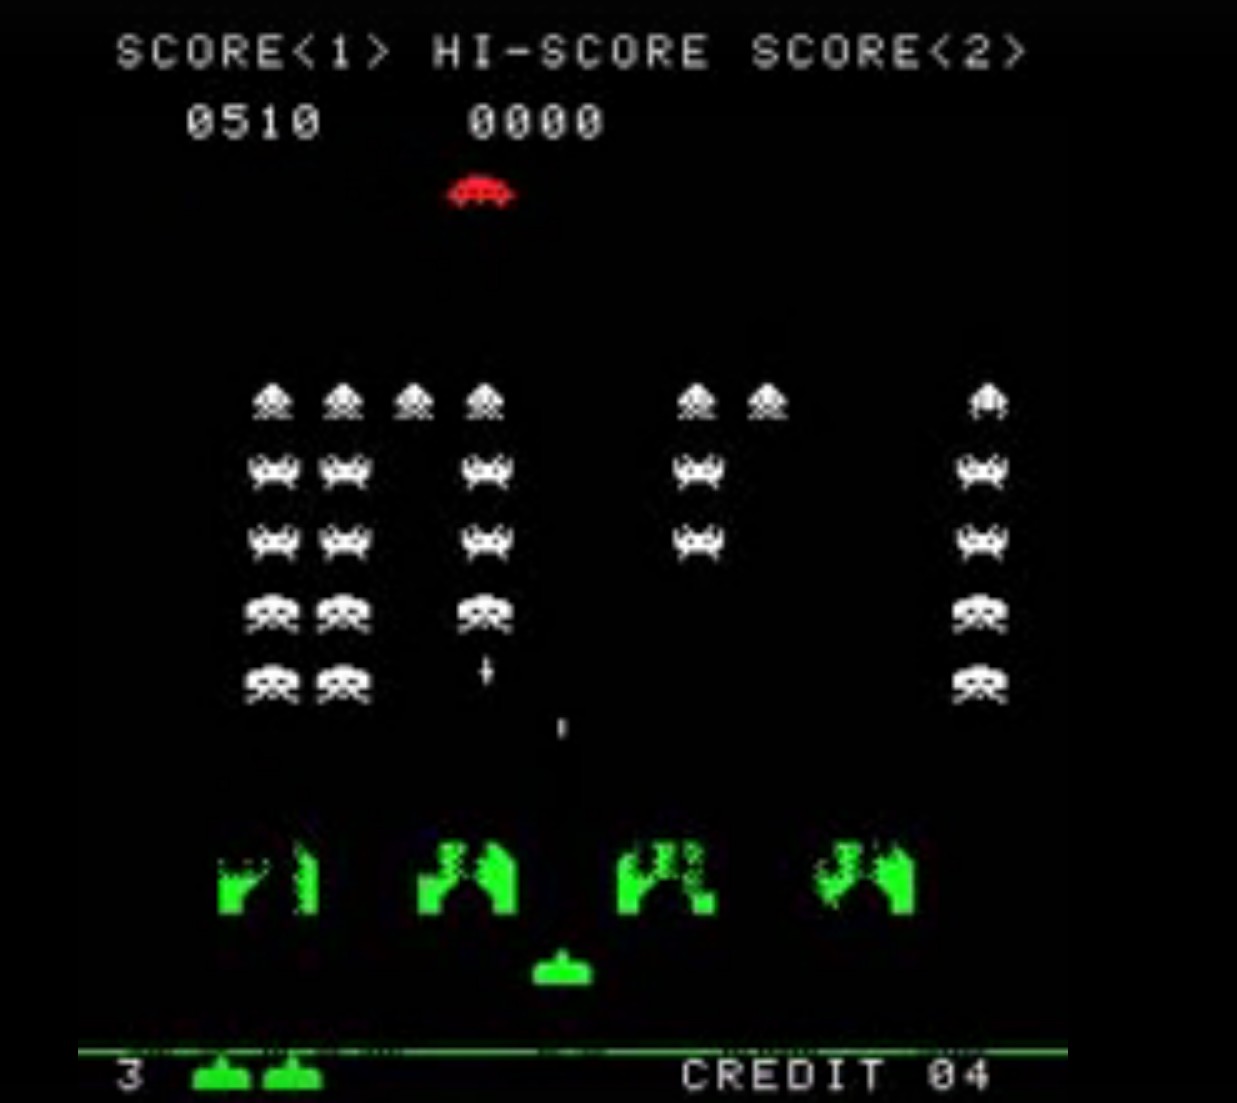 Space Invaders 04